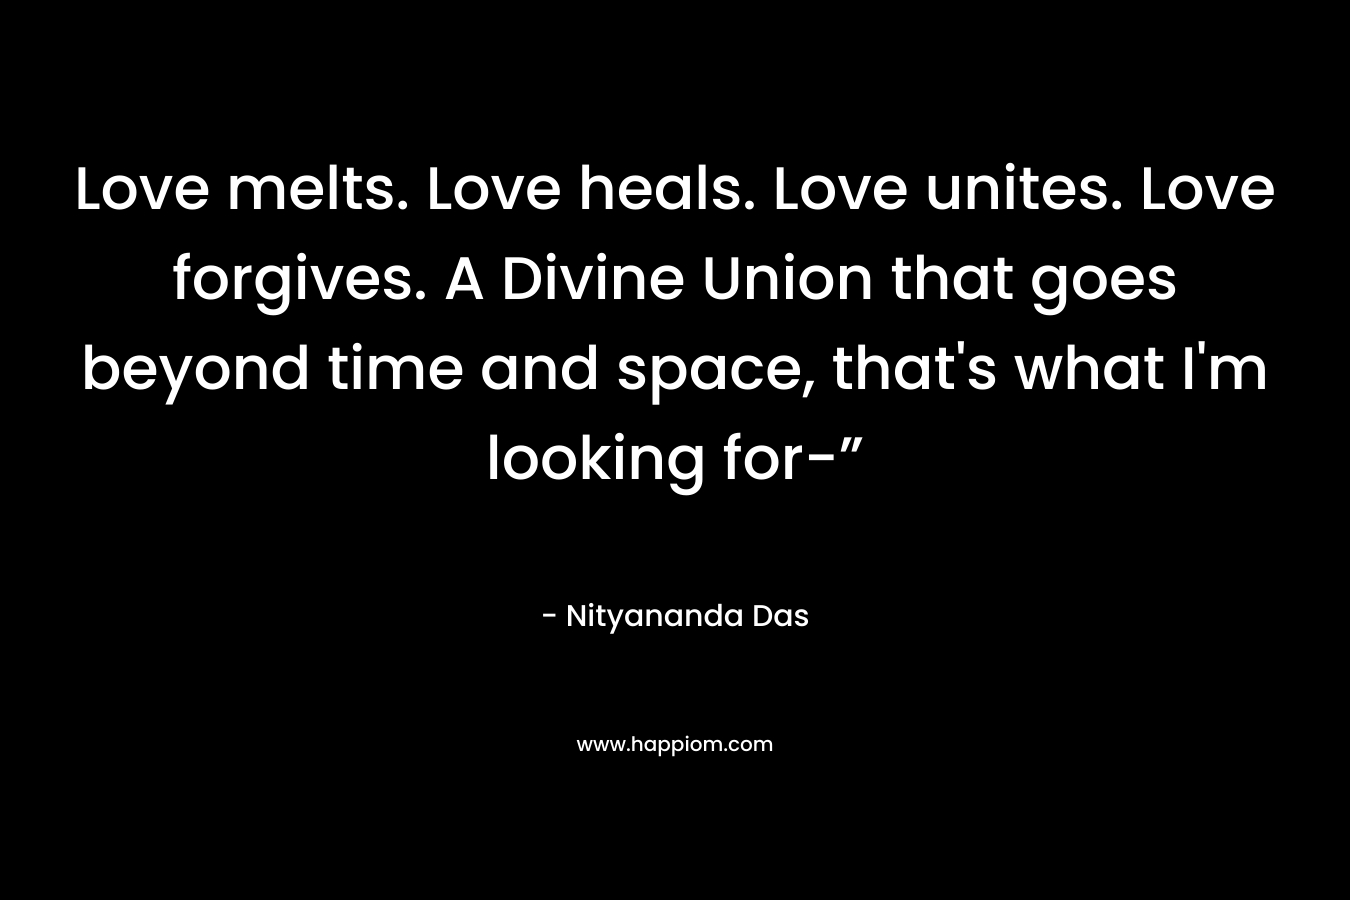 Love melts. Love heals. Love unites. Love forgives. A Divine Union that goes beyond time and space, that's what I'm looking for-”